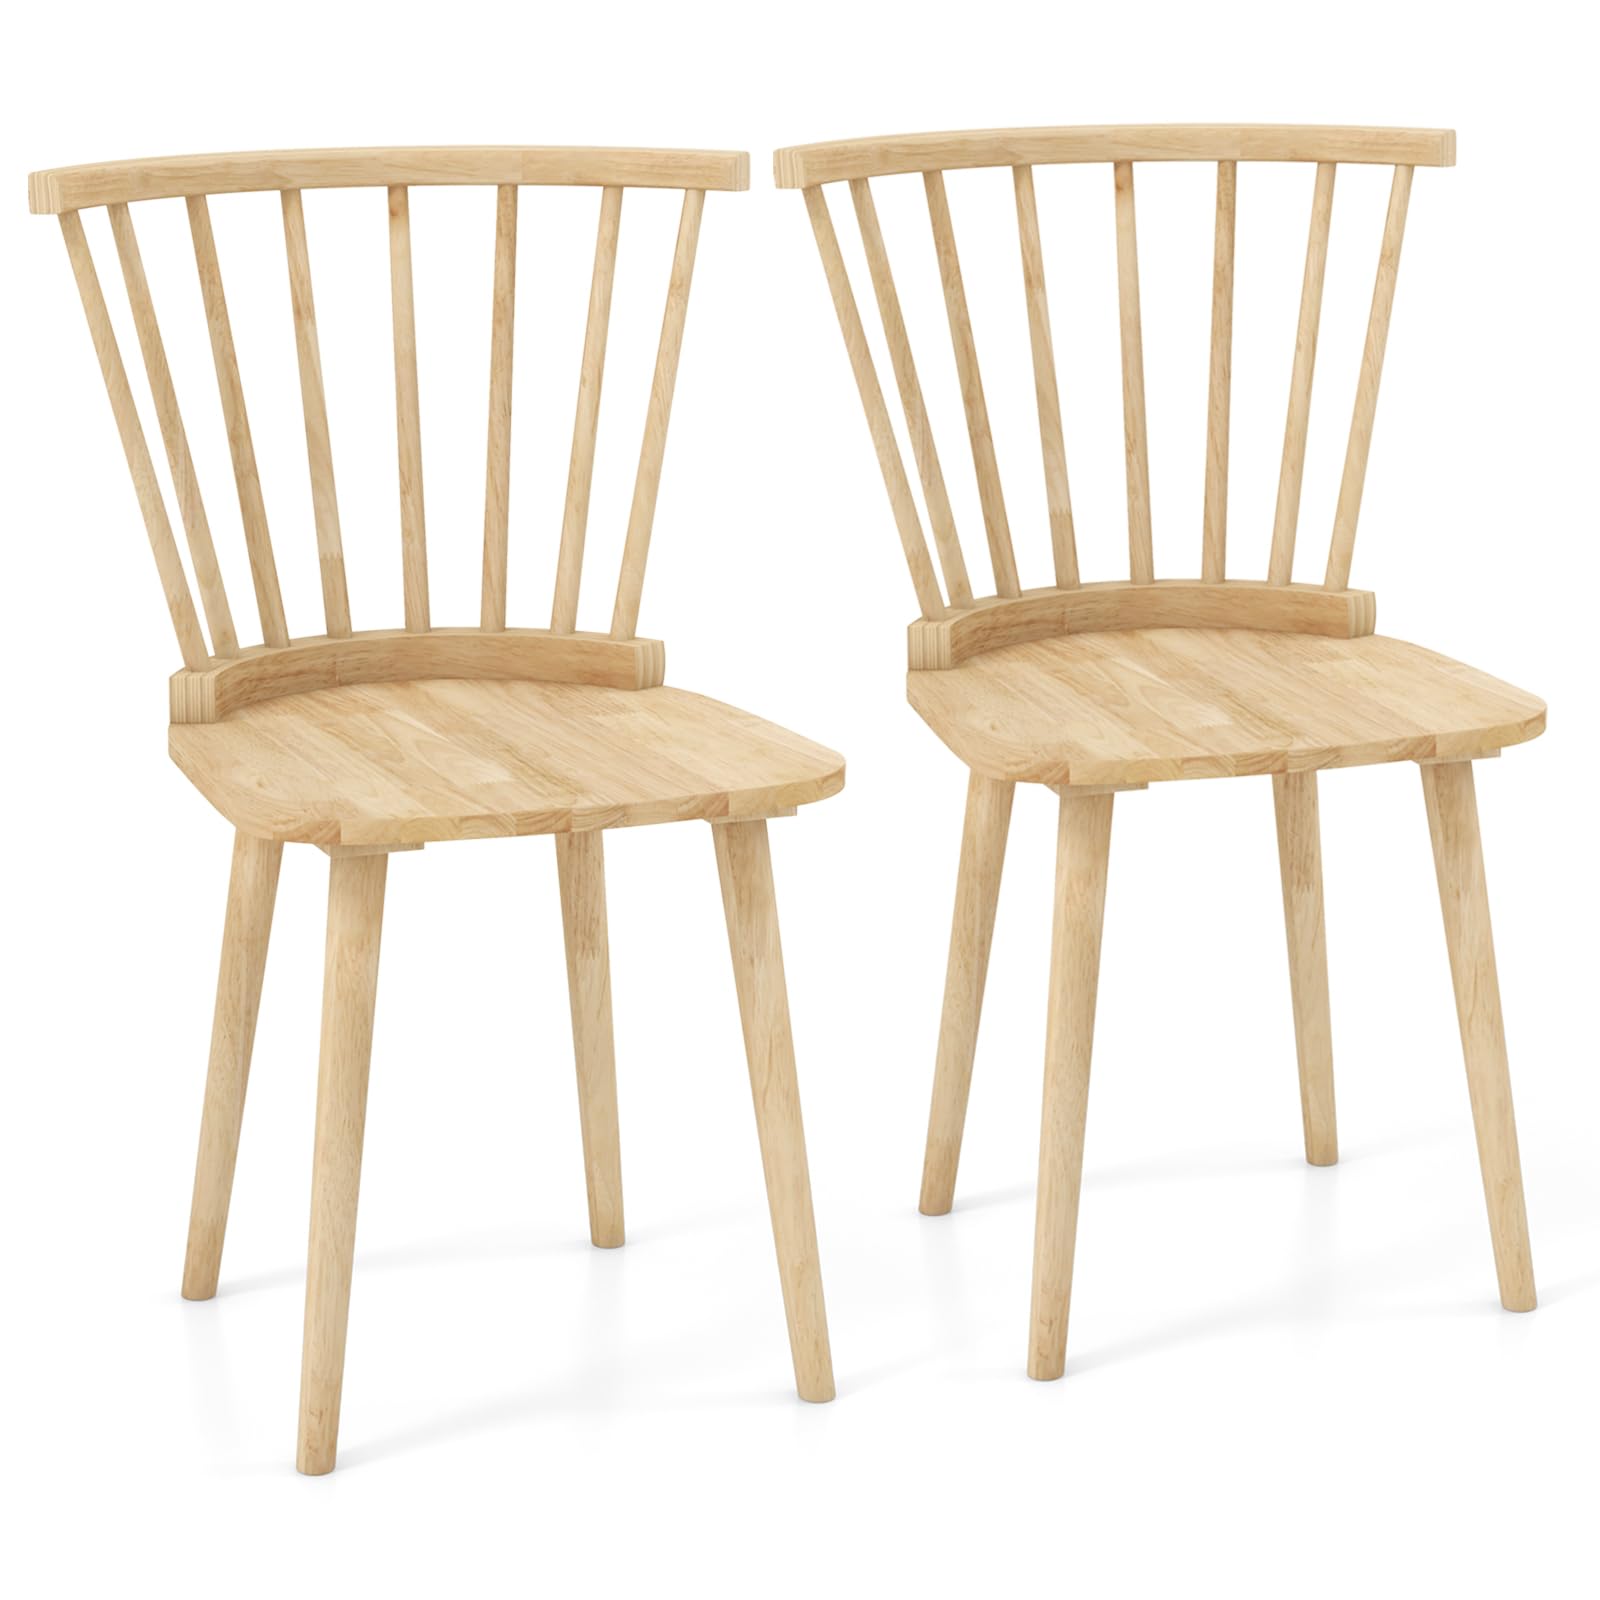 Giantex Wood Dining Chair, Windsor Dining Chairs